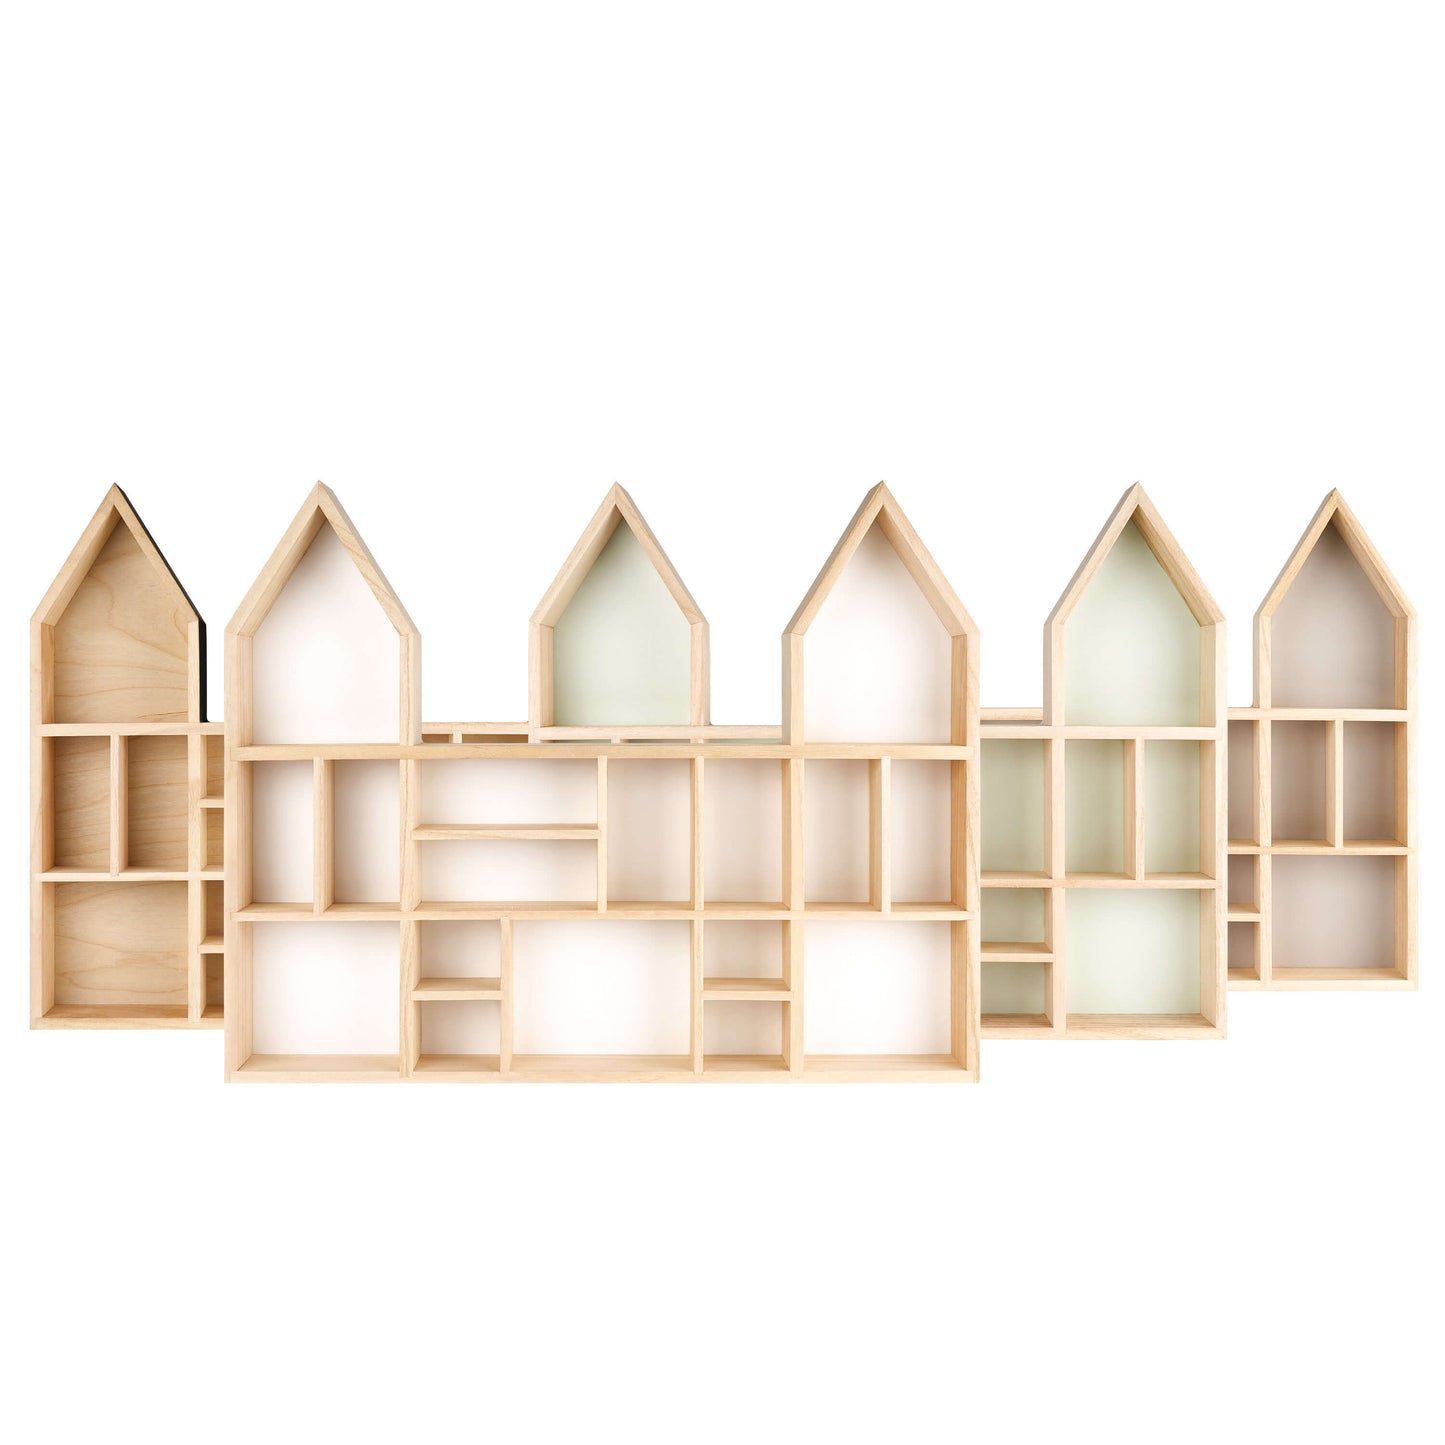 Castle shaped wooden toy display shelf - all color variations displayed side by side (front view)